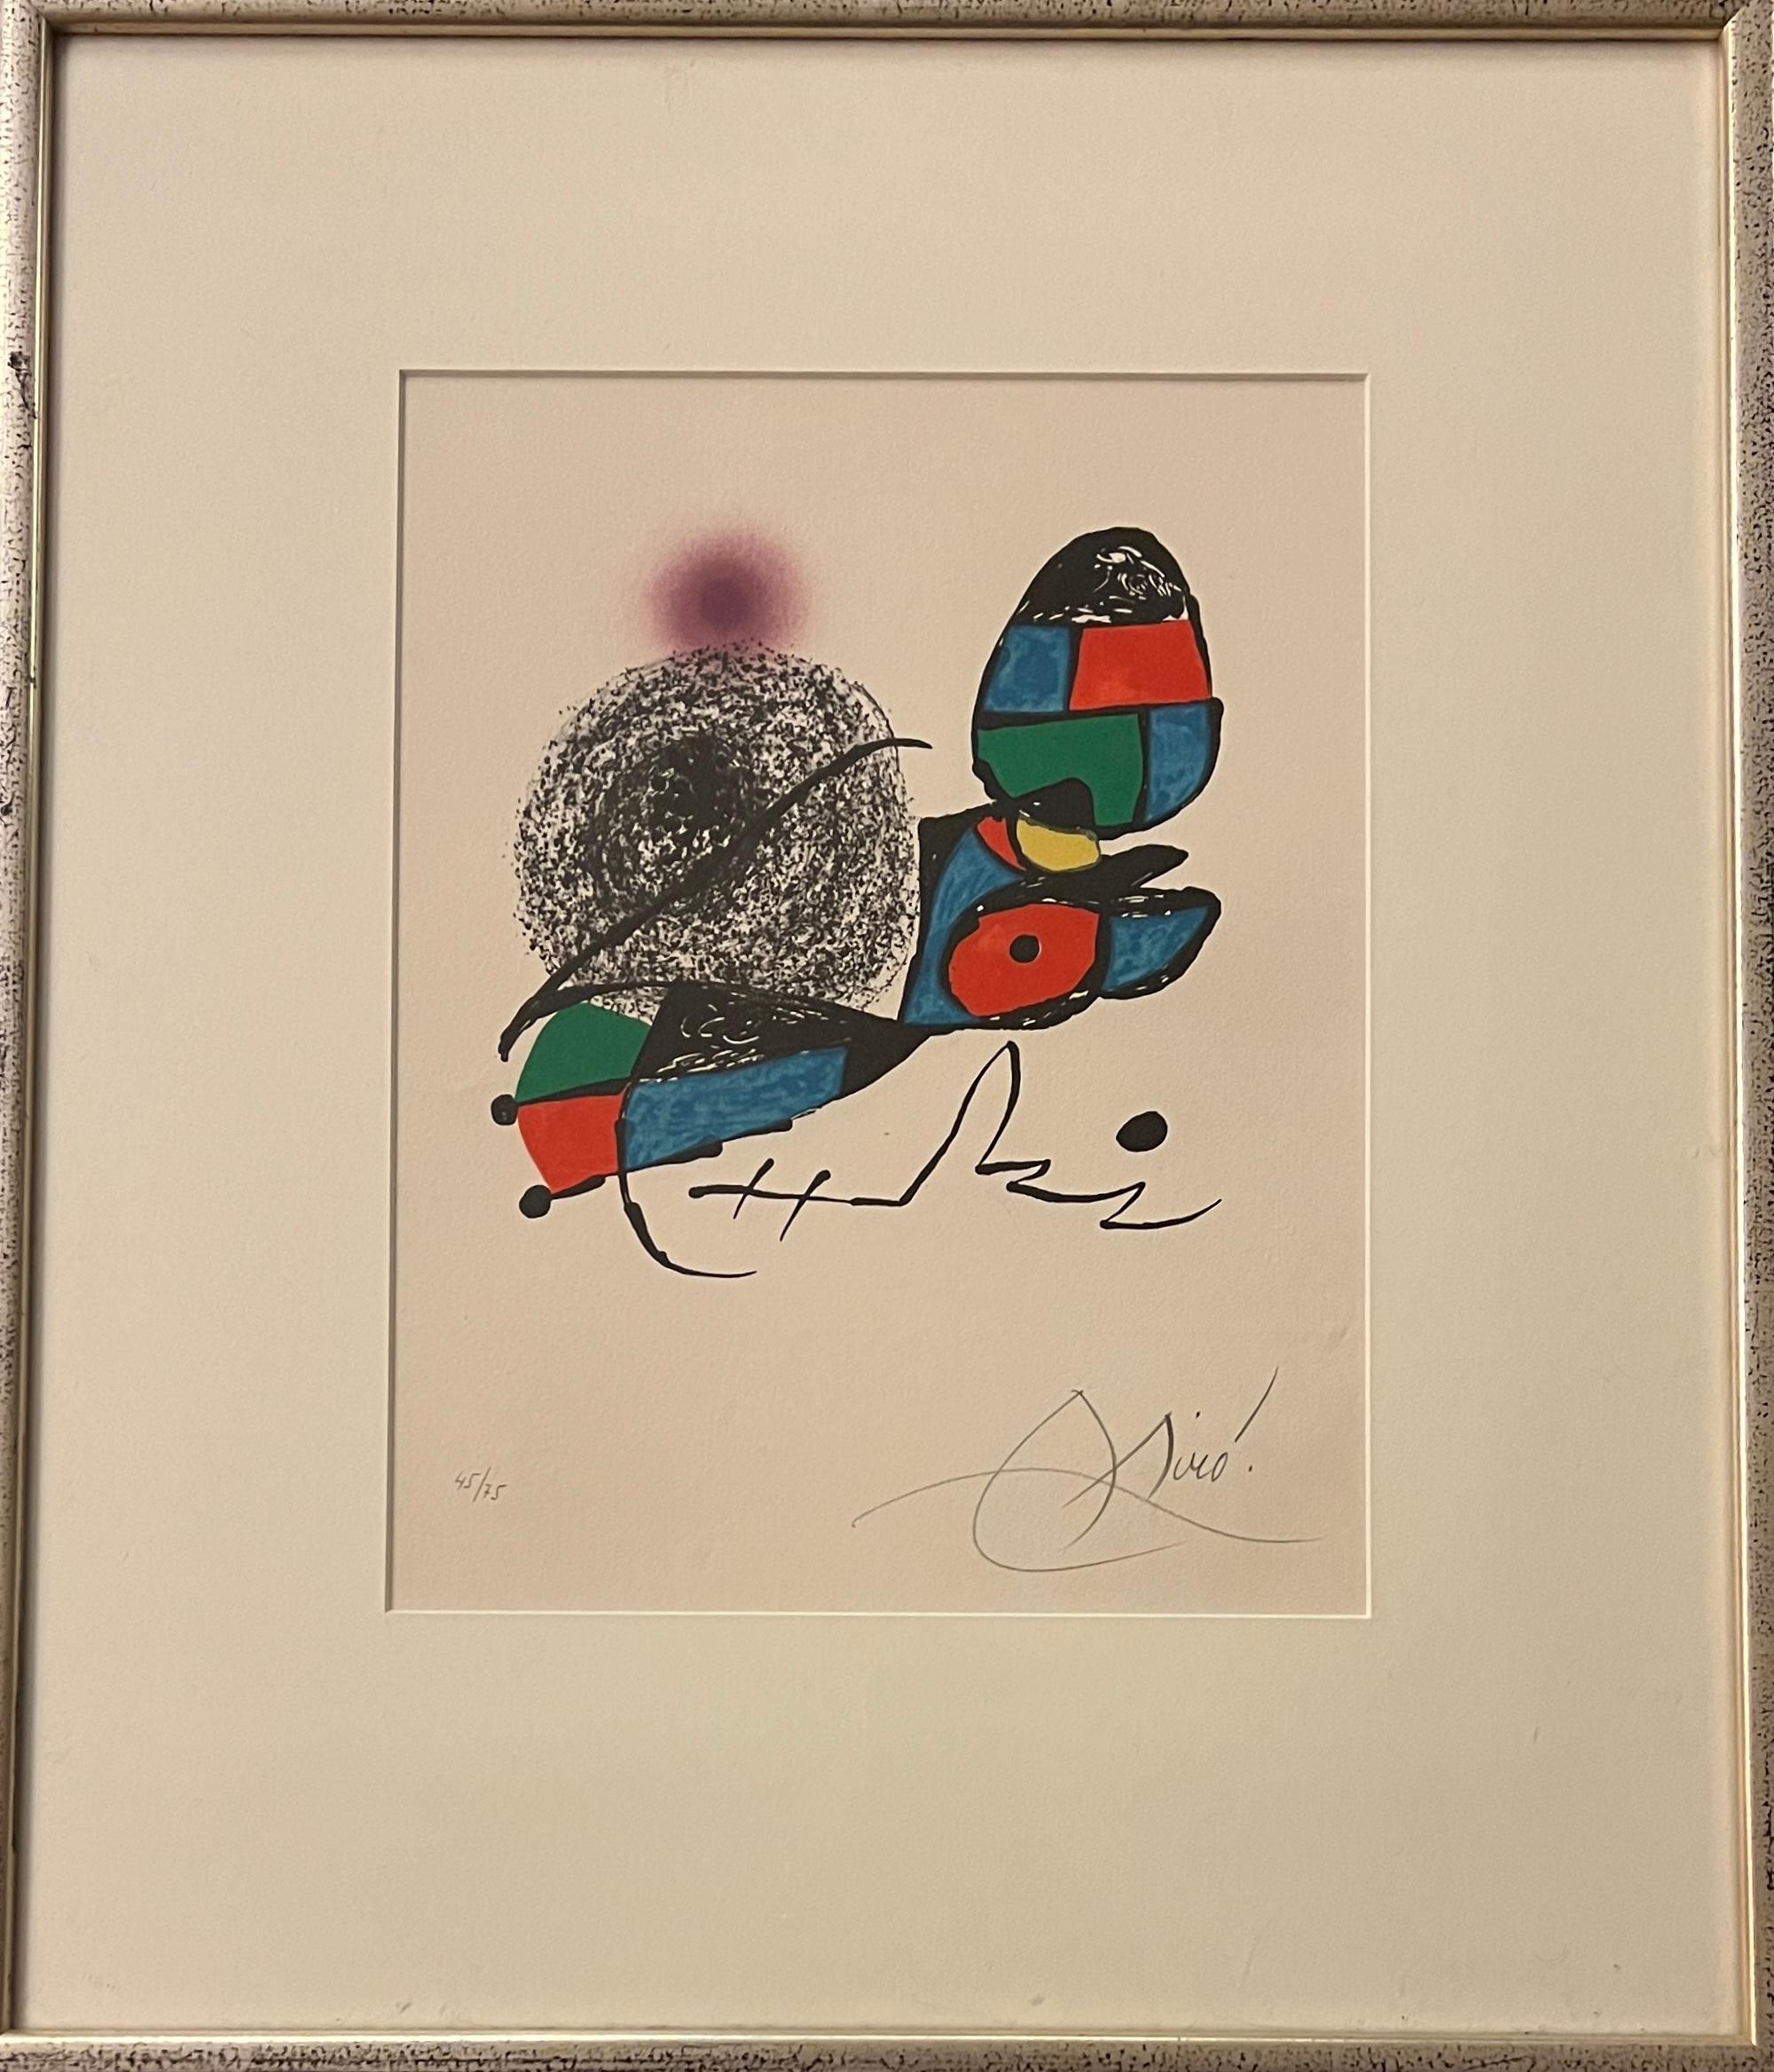 color lithograph on Guarro paper, edited in 1975
overall limited edition in 75 copies
Current exemplar numbered as: 45/75
signed in pencil by artist
Paper size (or piece size) : 36 x 30 cm
Framed size: 56 x 47.5 cm
very good